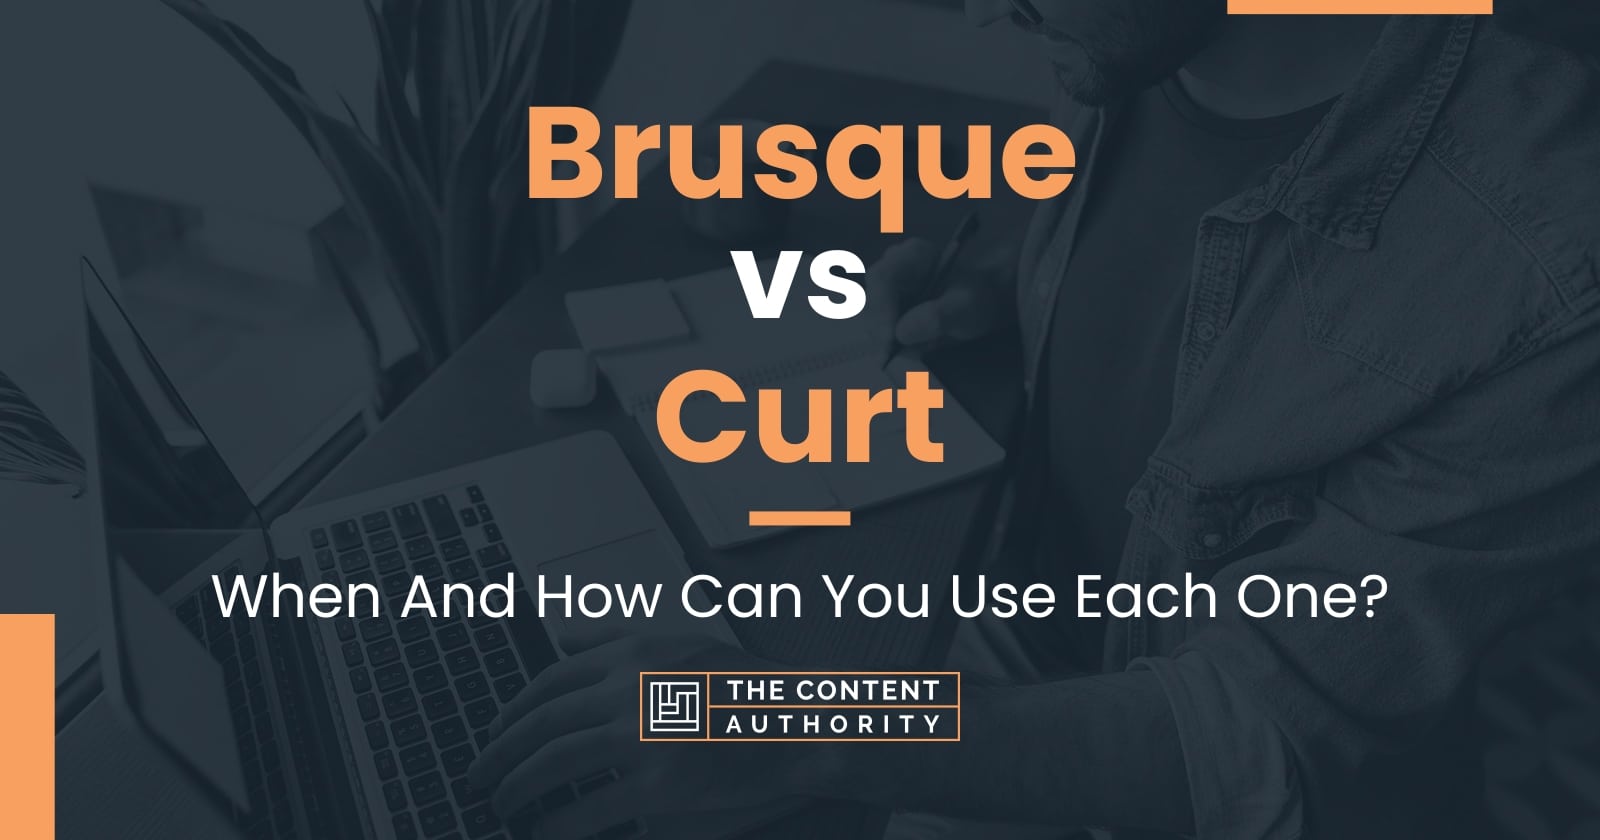 Brusque vs Curt: When And How Can You Use Each One?